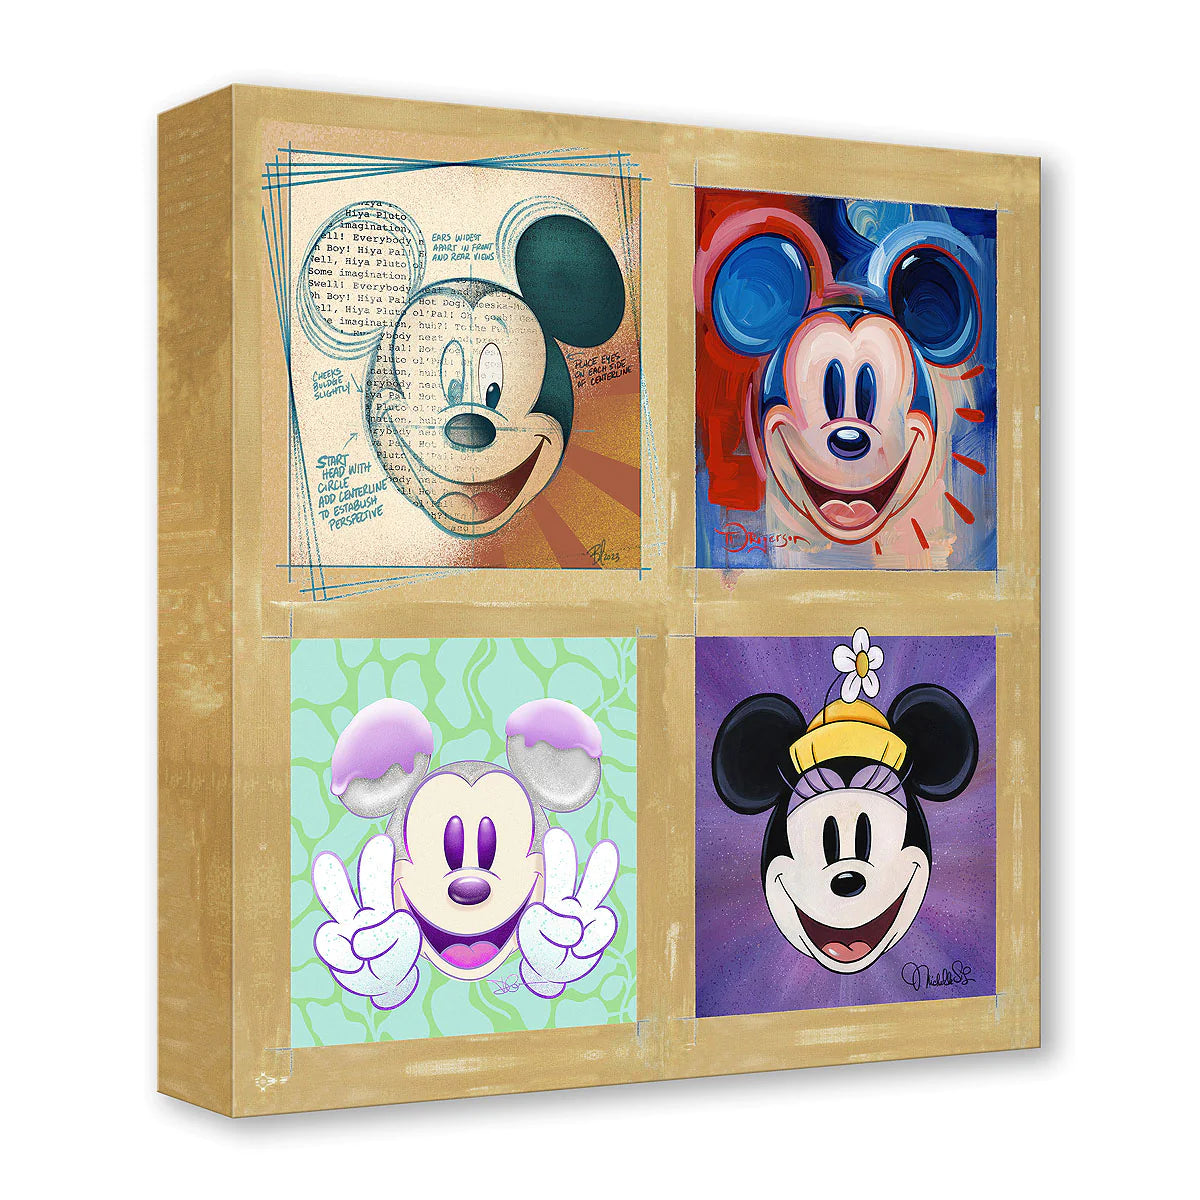 Disney "Four by Four" by Bret Iwan, Tim Rogerson, Dom Corona & Michelle St.Laurent Limited Edition Canvas Giclee